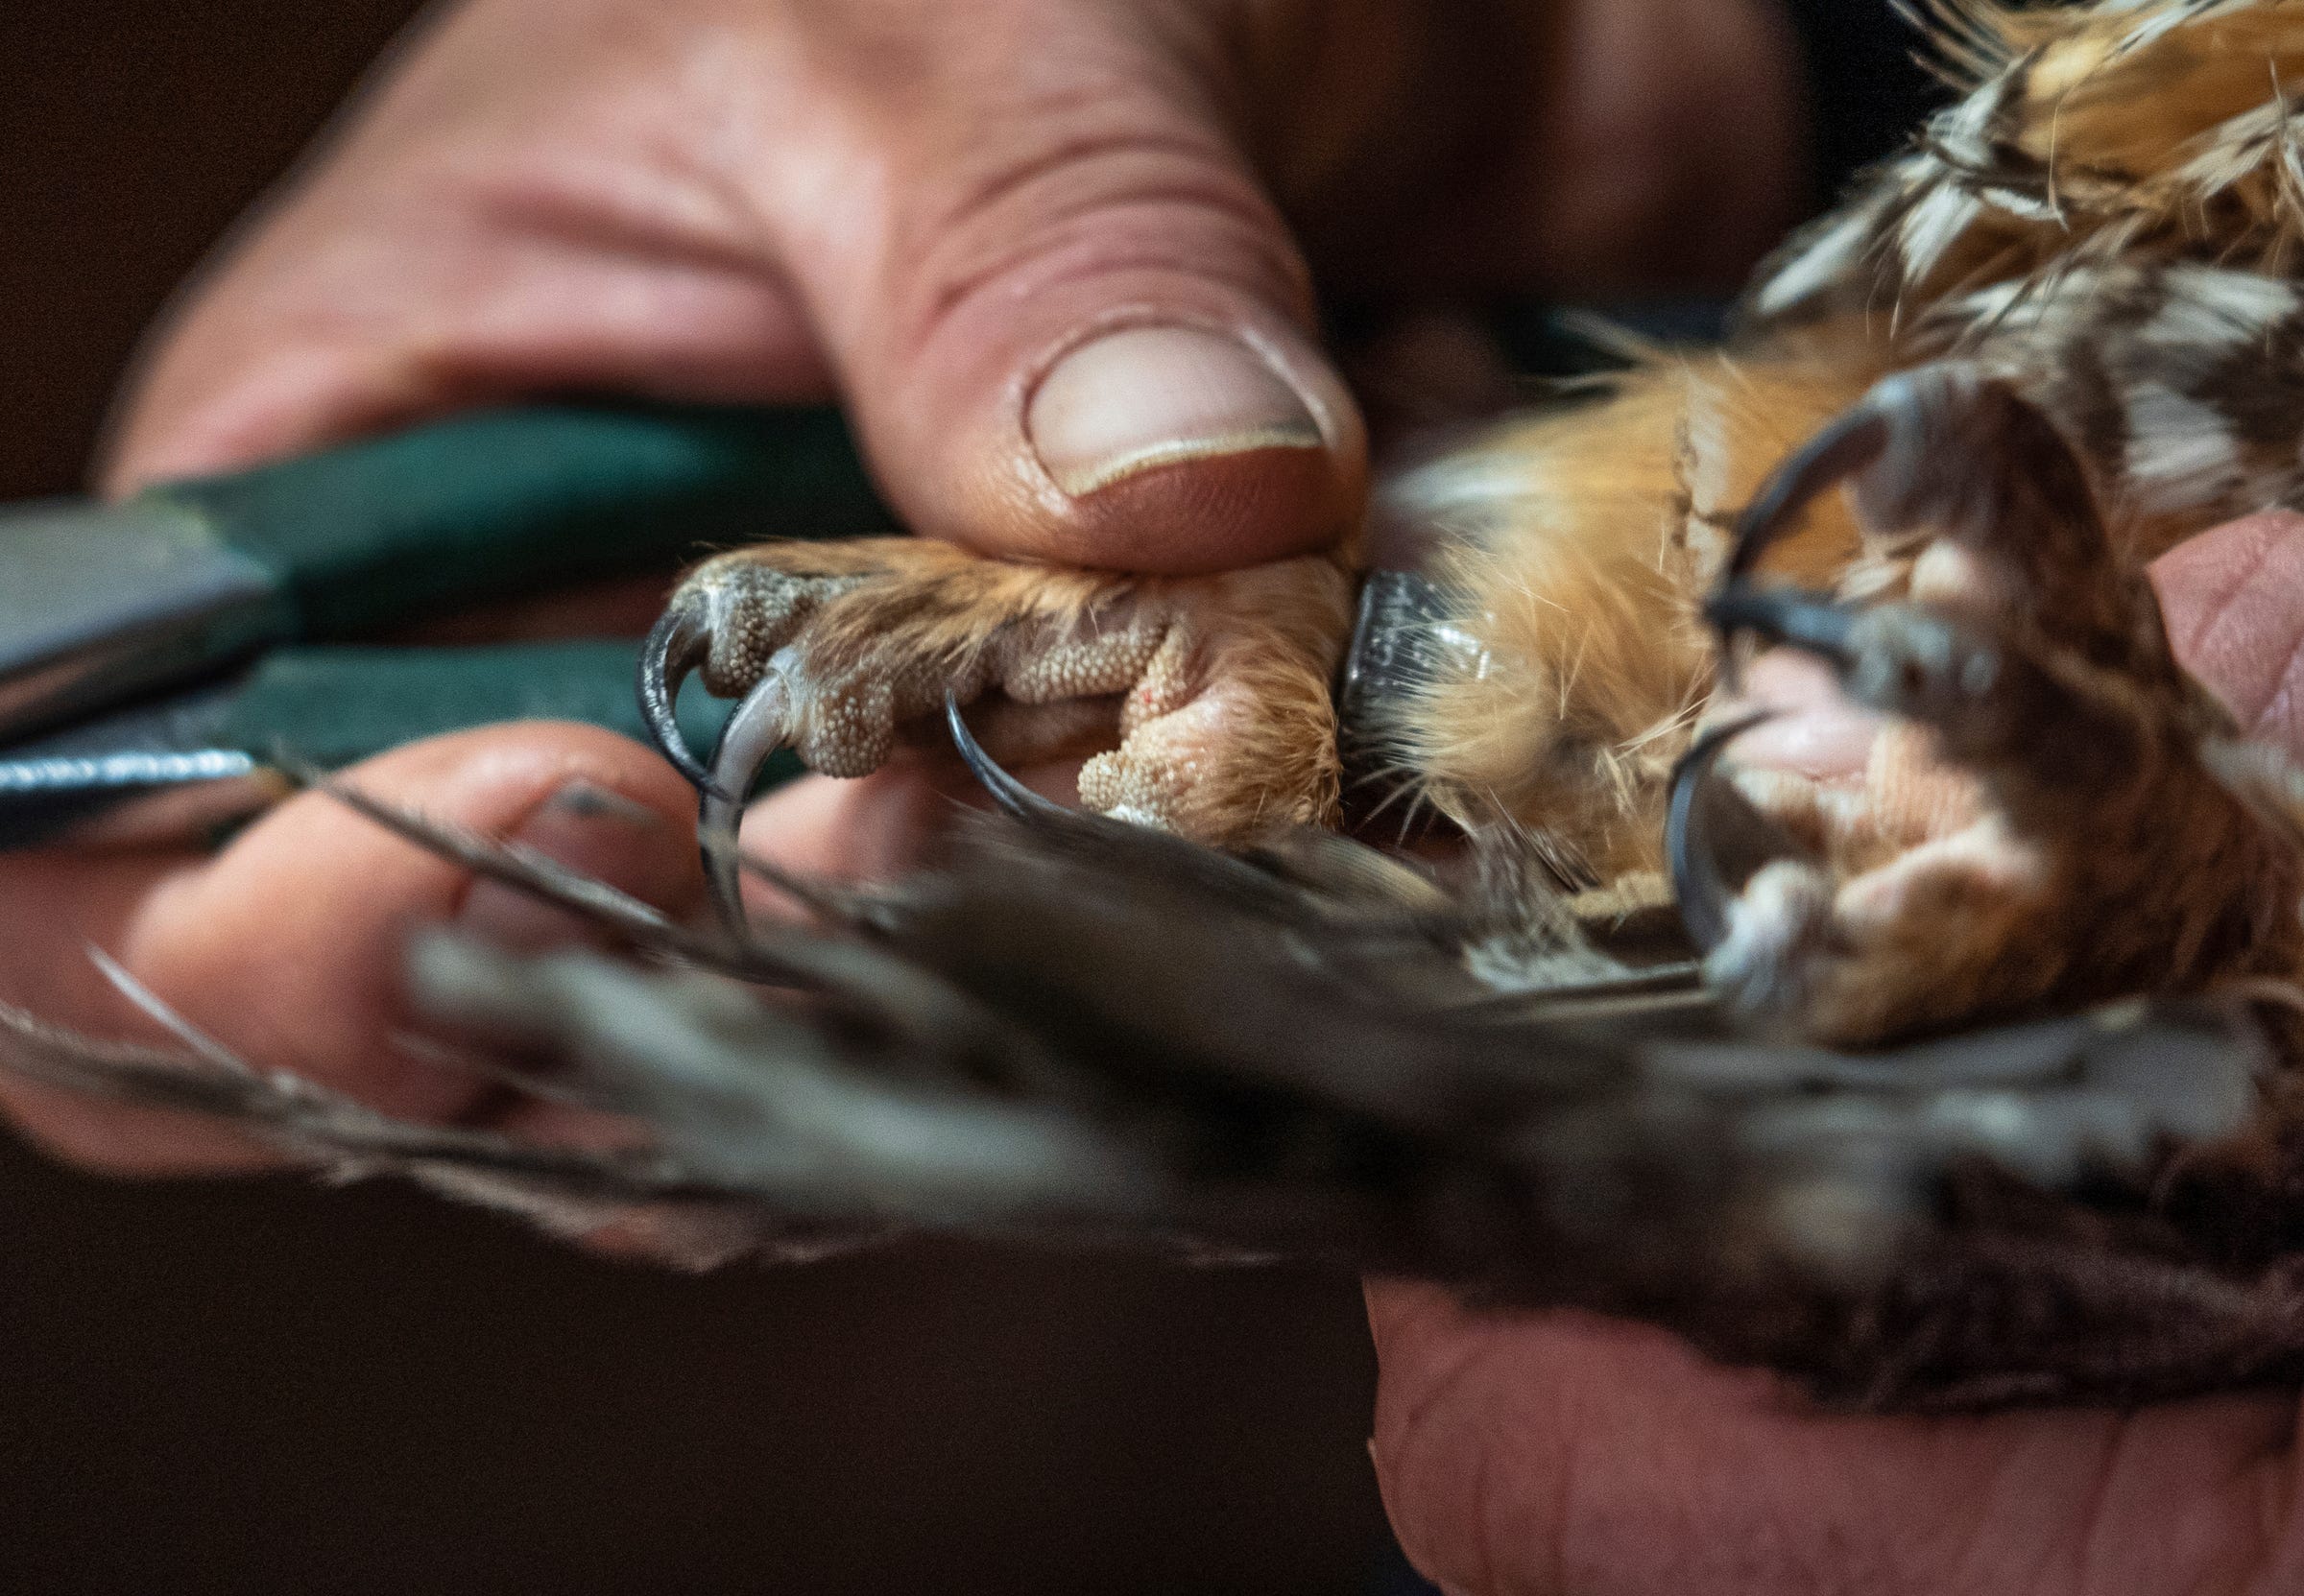 Owl bander Chris Neri works on banding a long-eared owl captured at the Whitefish Point Bird Observatory in Paradise located in Michigan's Upper Peninsula on Friday, April 21, 2023, during their spring migration through the area along Lake Superior.